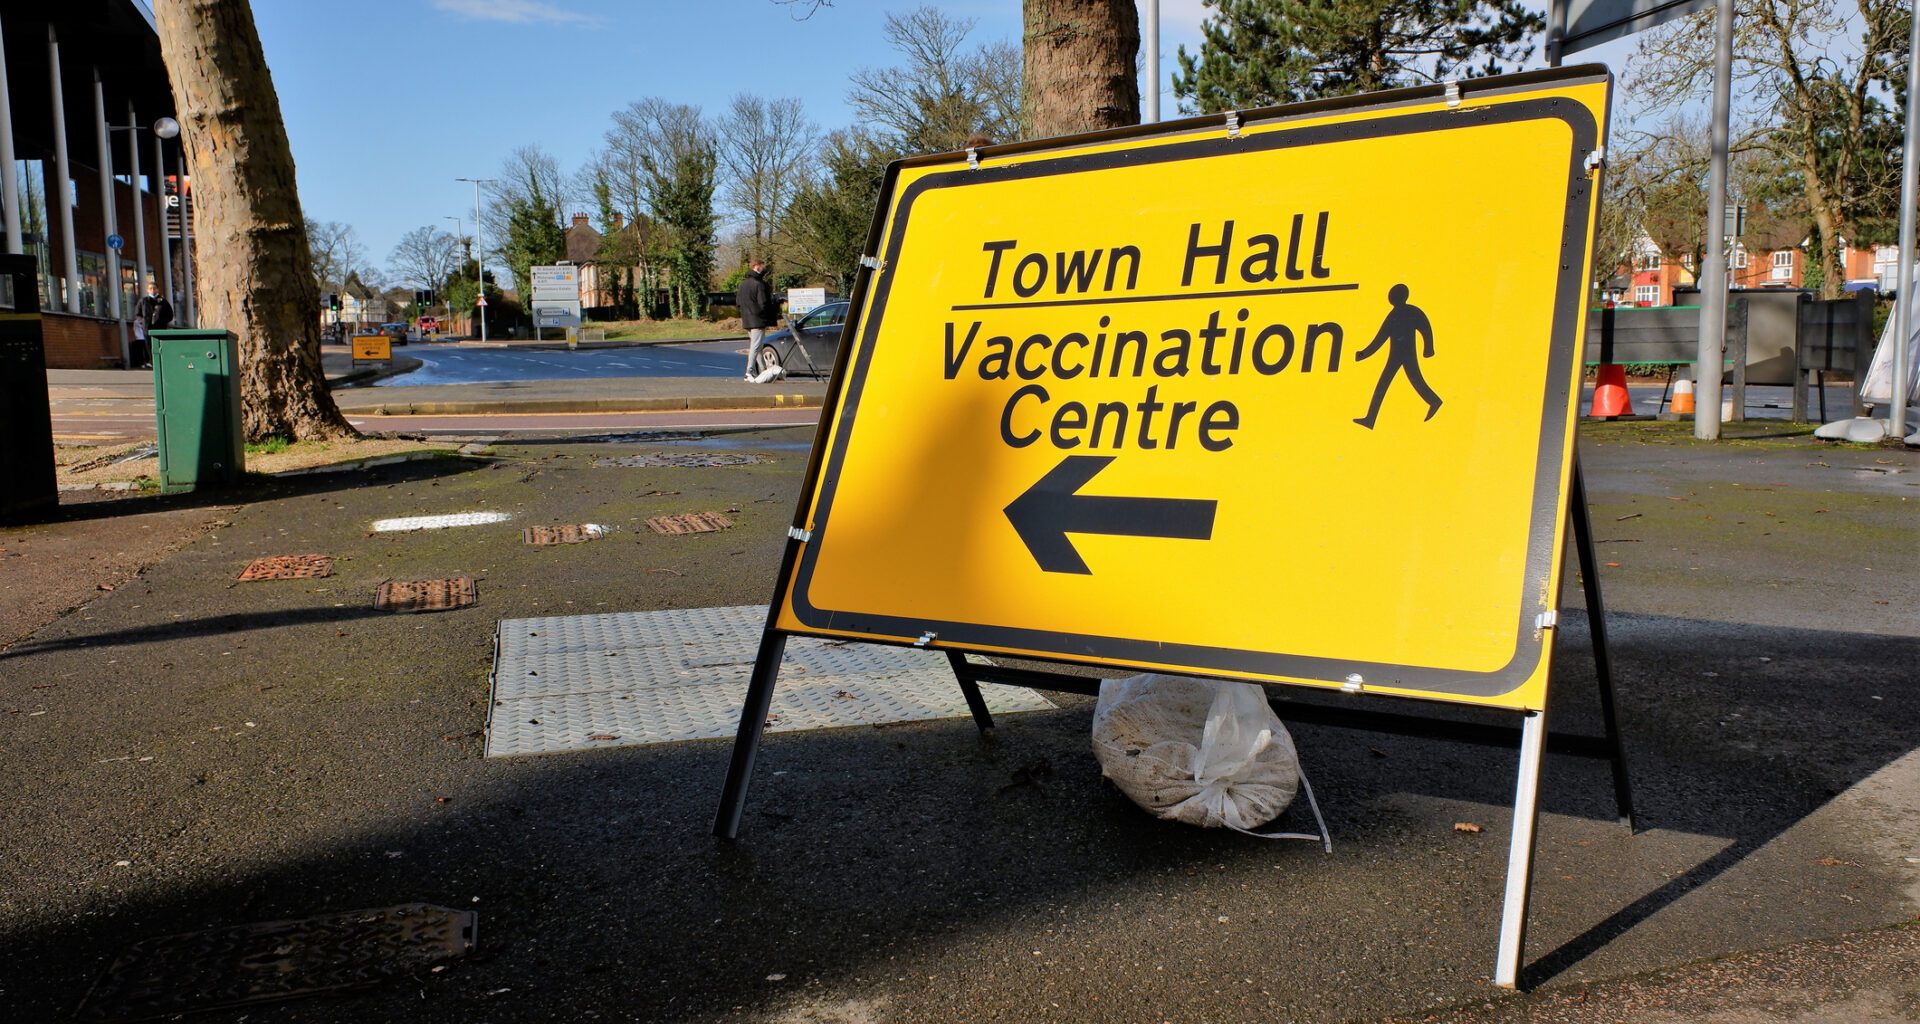 Claim that Brexit allowed faster vaccine rollout is False 1